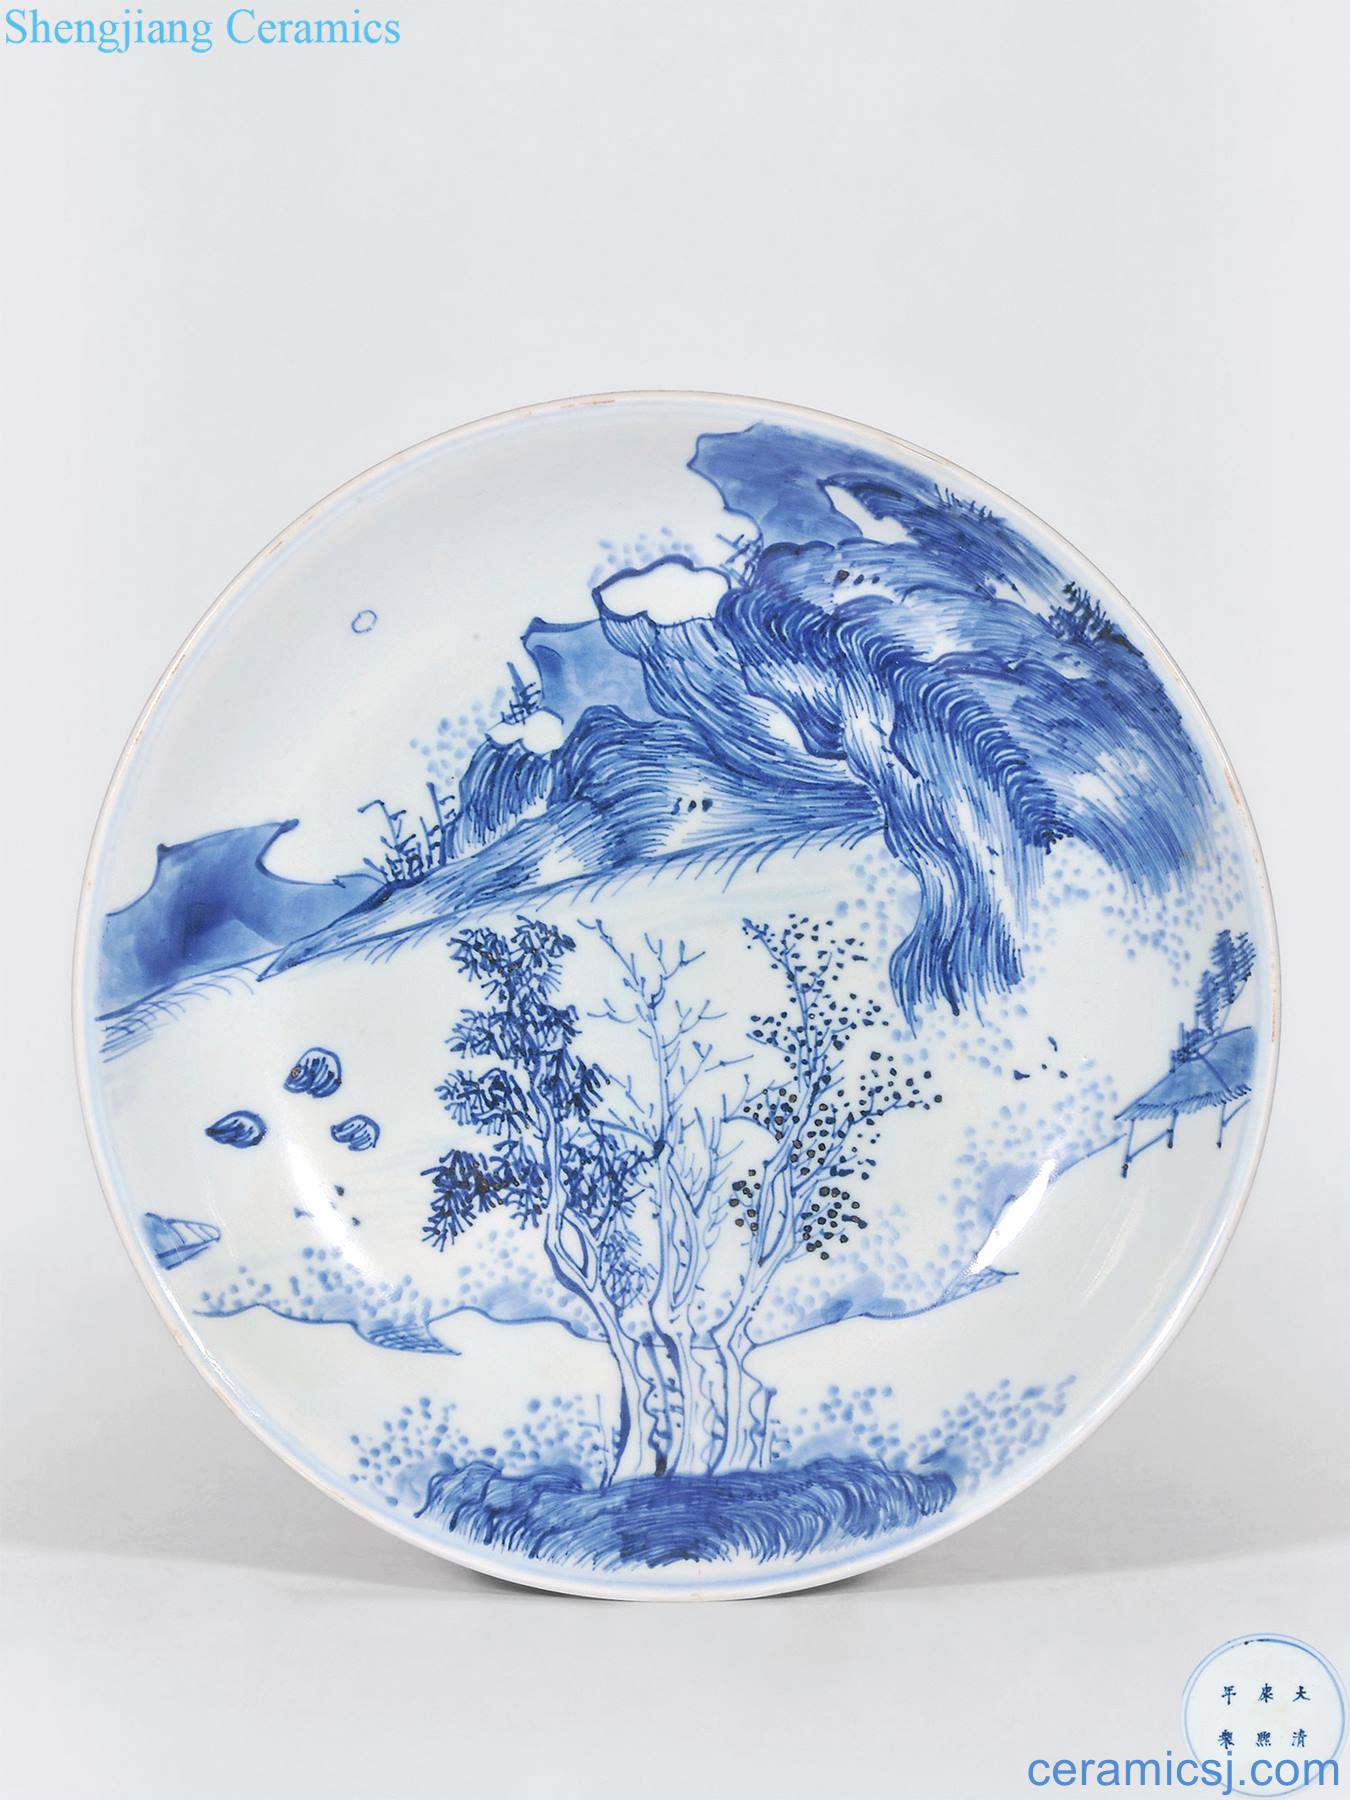 The qing emperor kangxi in the early Blue and white landscape pattern